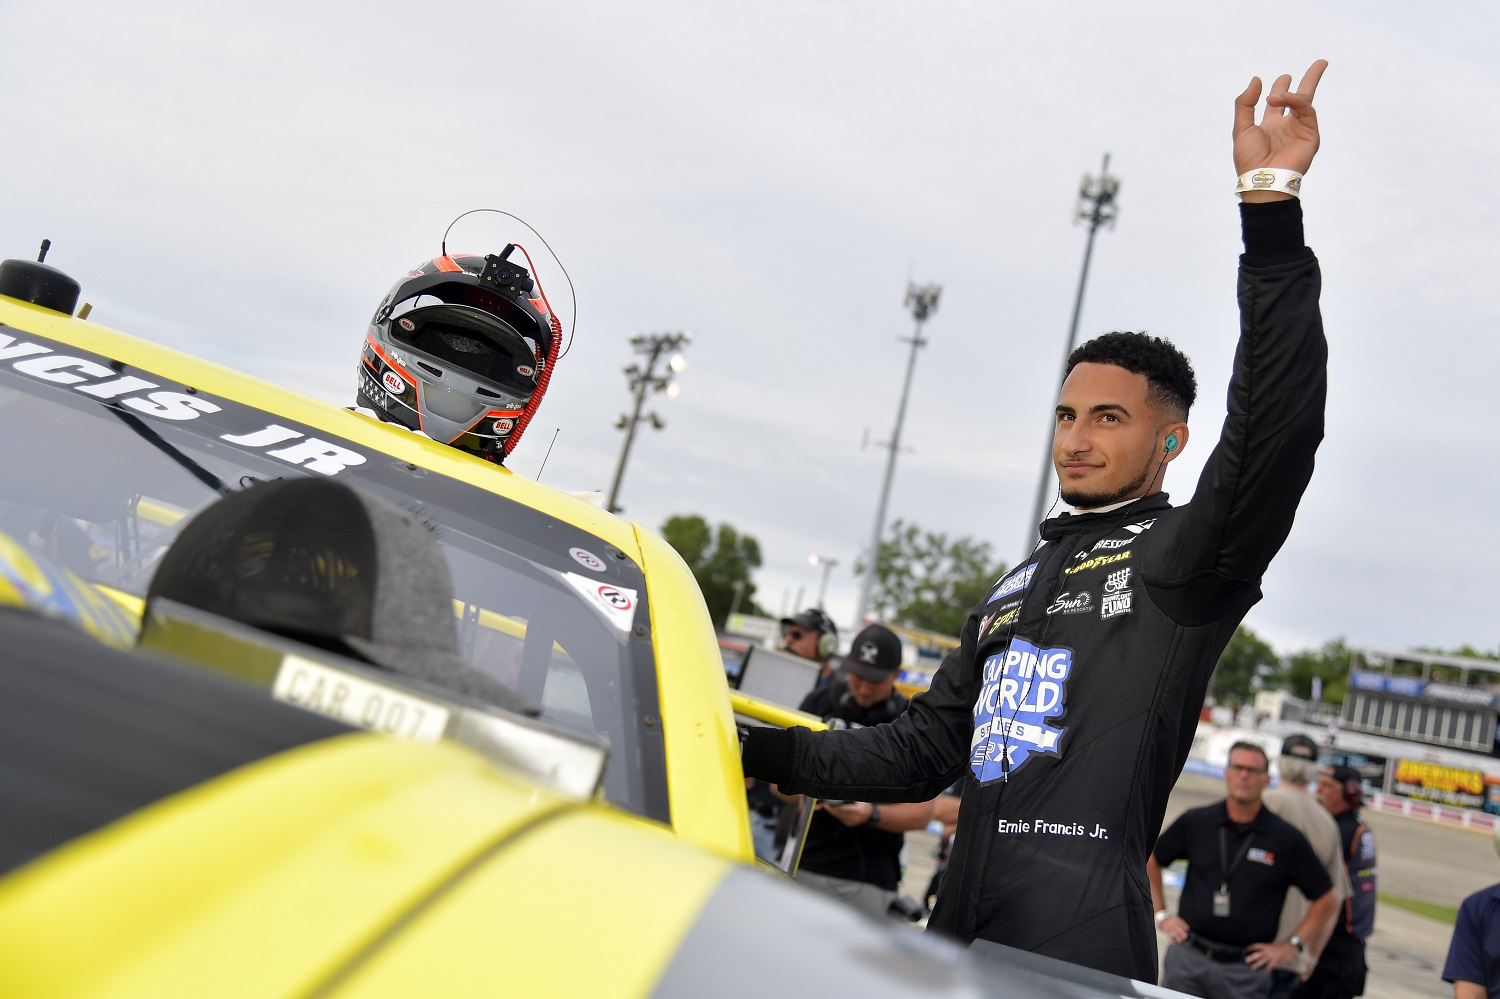 Ernie Francis Jr. waves to fans before climbing into his car during the Camping World Superstar Racing Experience event at Slinger Speedway on July 10, 2021. | Logan Riely/SRX via Getty Images